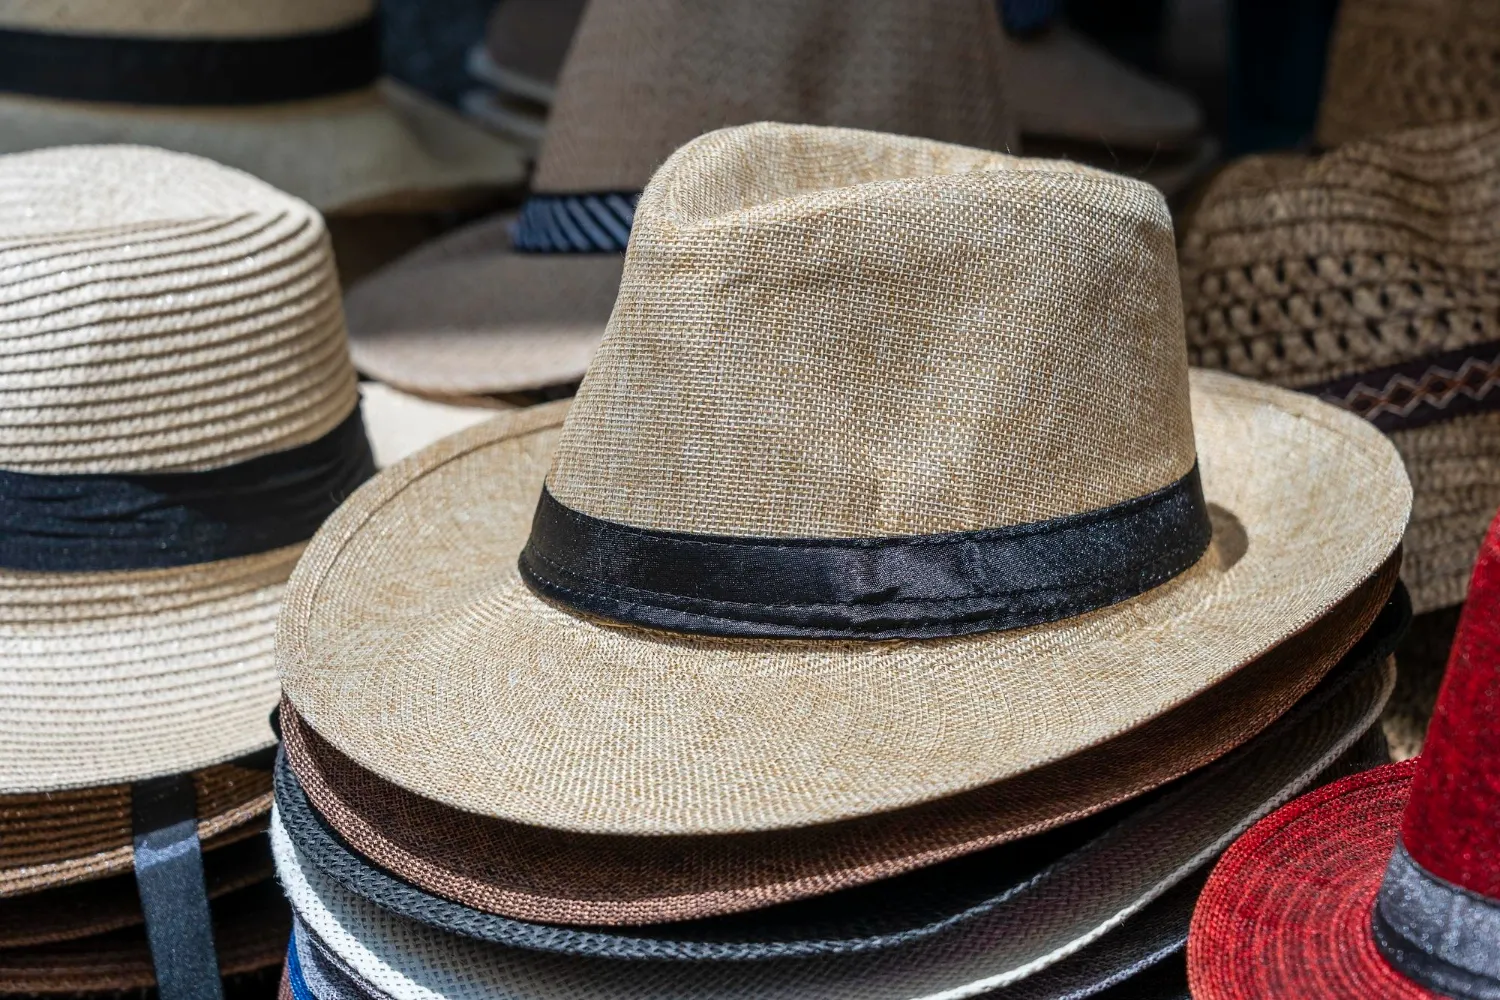 Straw hats on display for sale to tourists on street local market in ubud island bali indonesia closeup